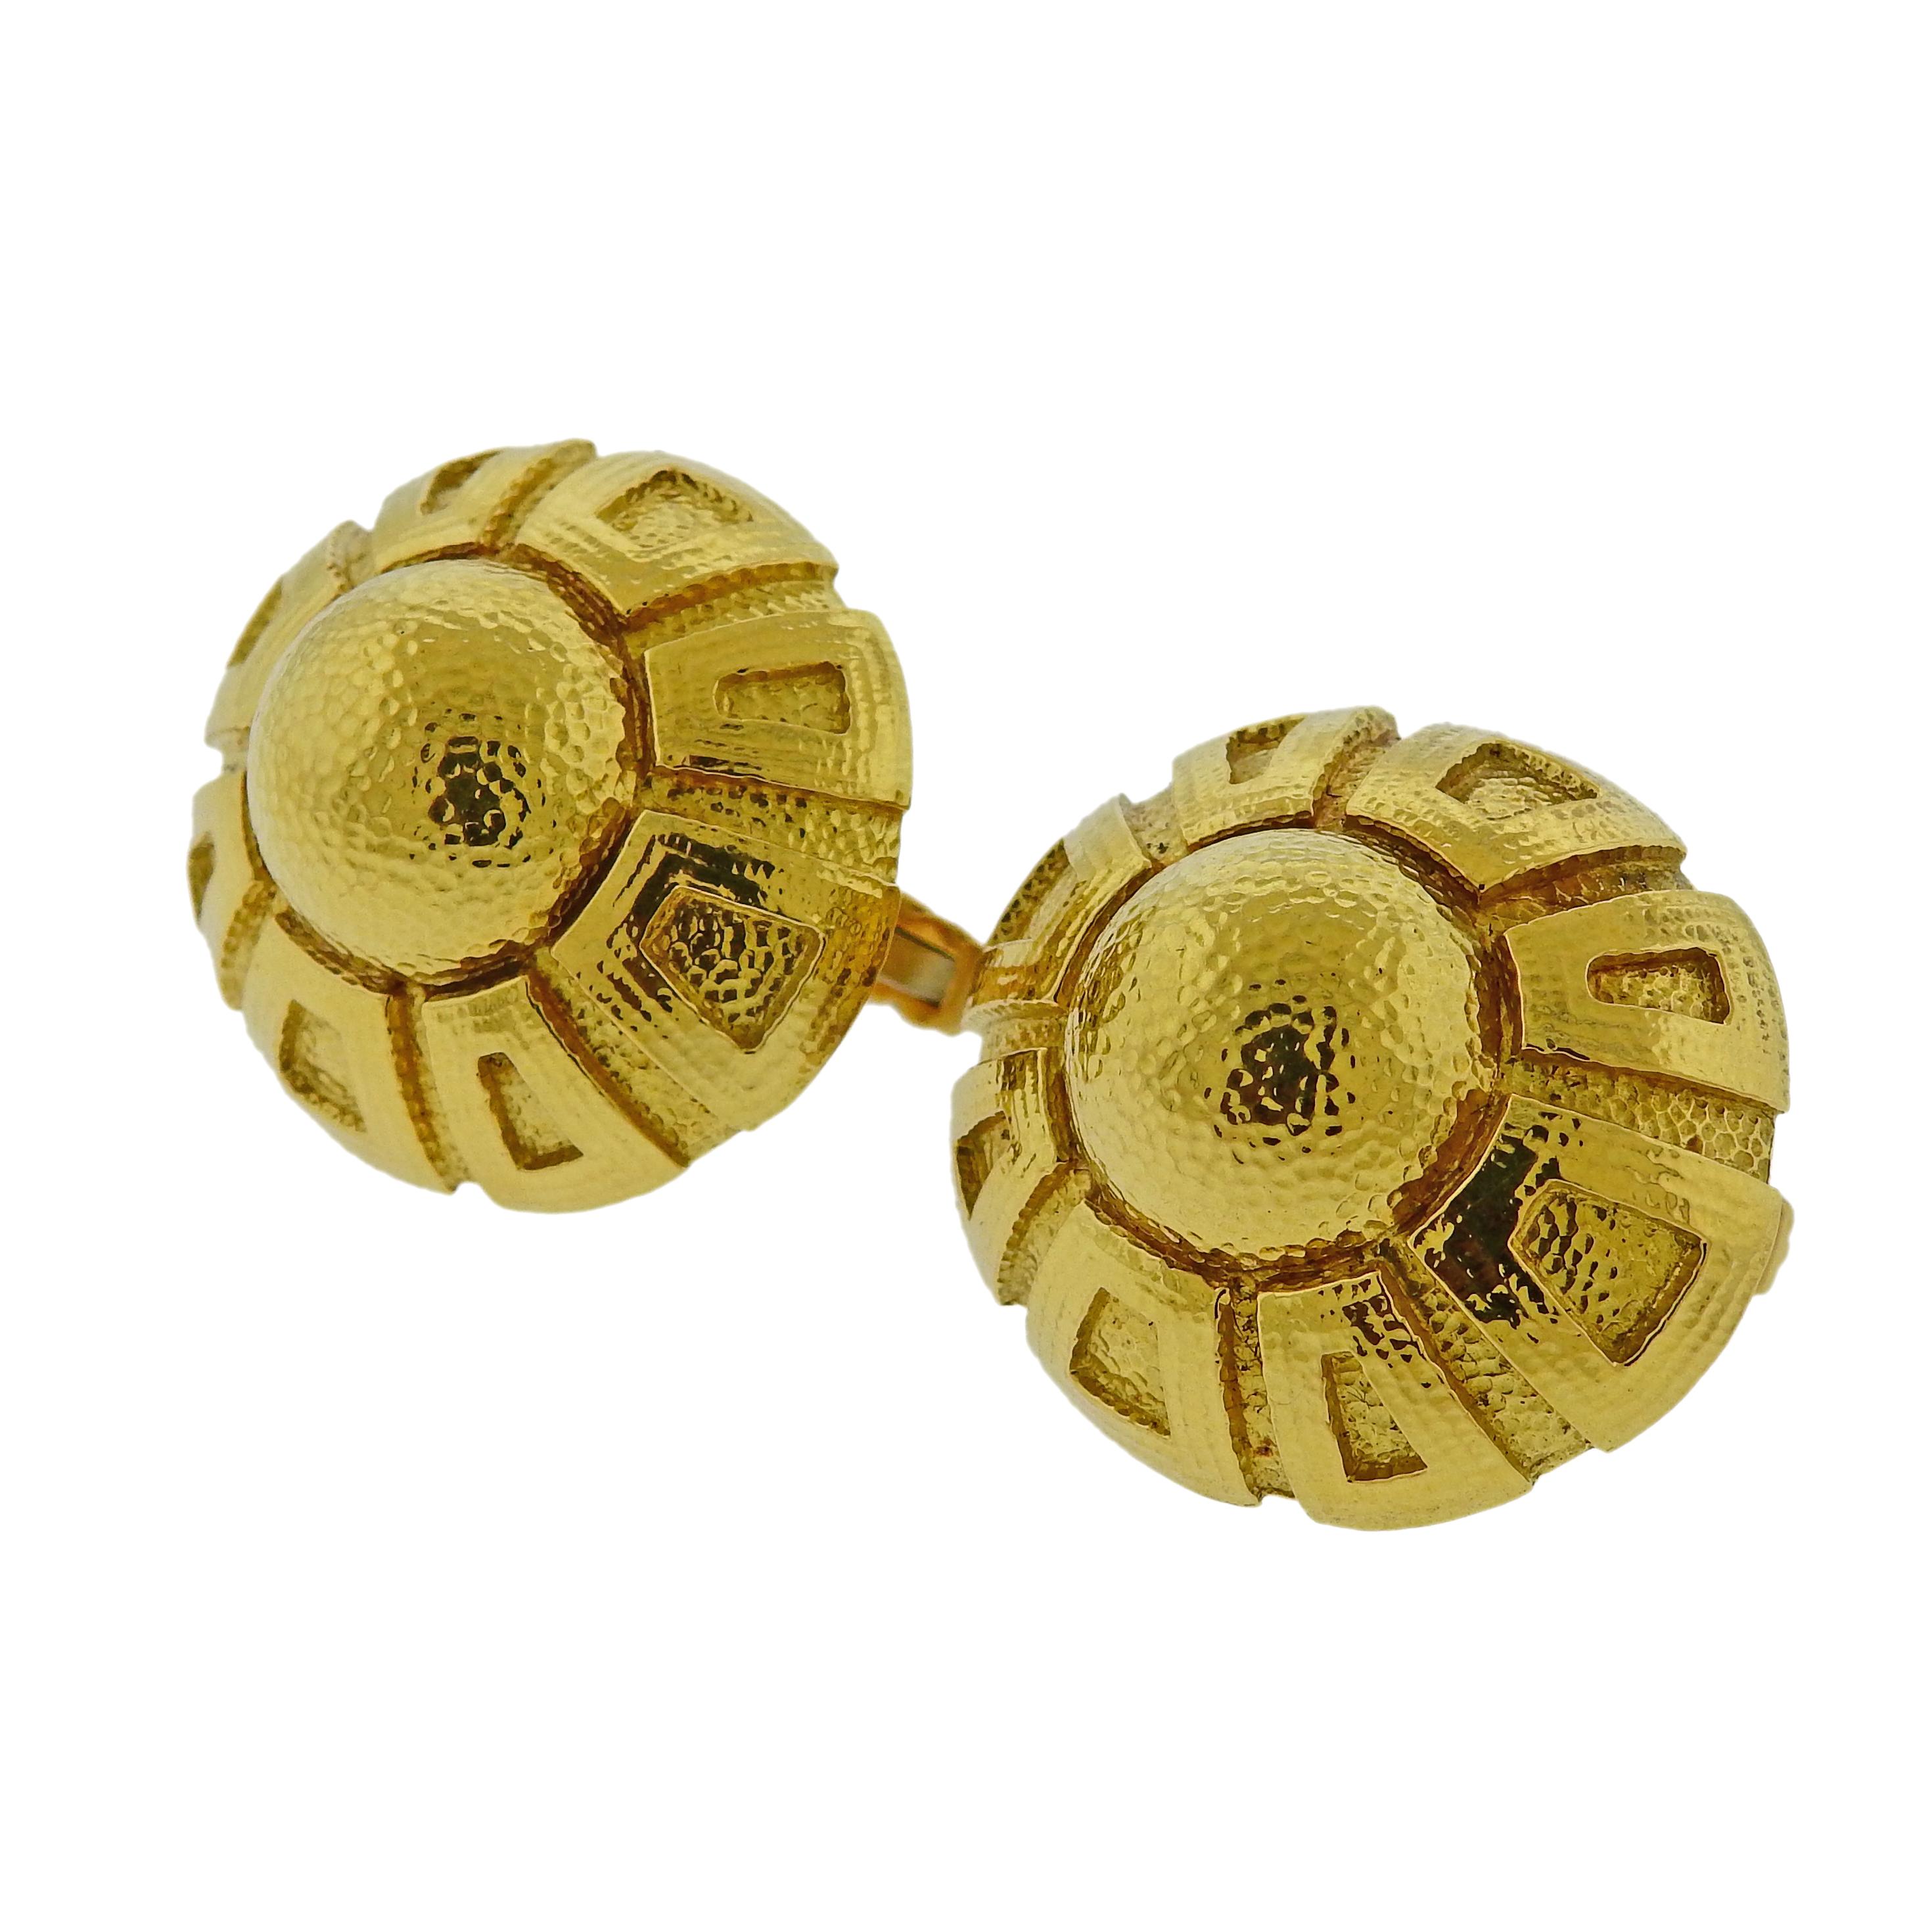 Pair of 18k yellow gold massive hand hammer finish cufflinks by David Webb, each measuring 29mm x 32mm. Marked Wbeb and 18k. Weigh 37.4 grams. 

SKU#C-00432